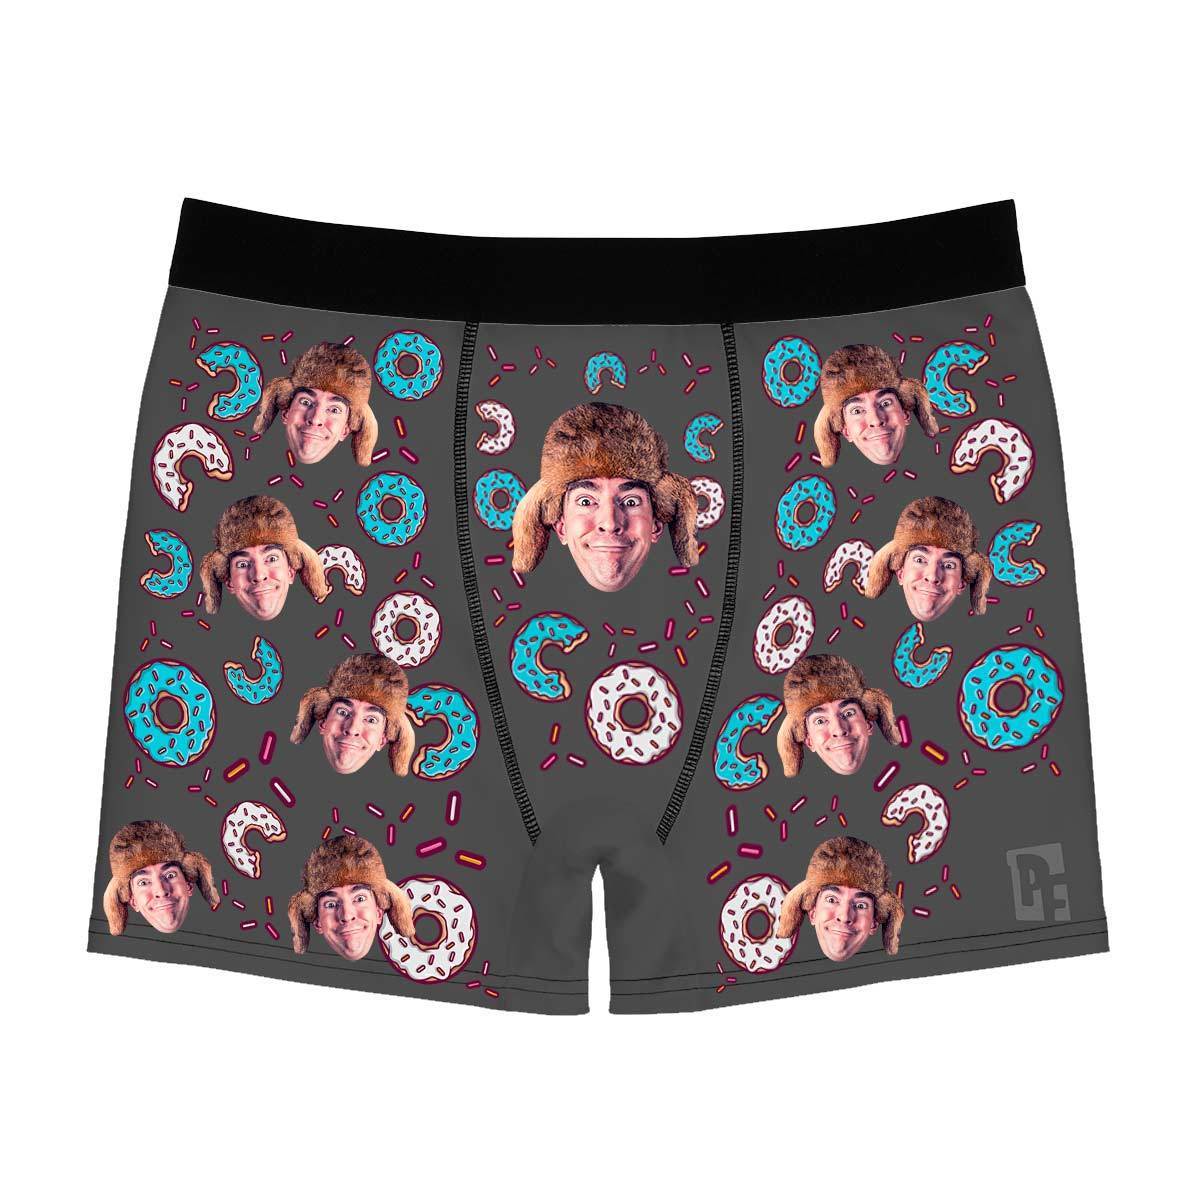 Dark Donuts men's boxer briefs personalized with photo printed on them